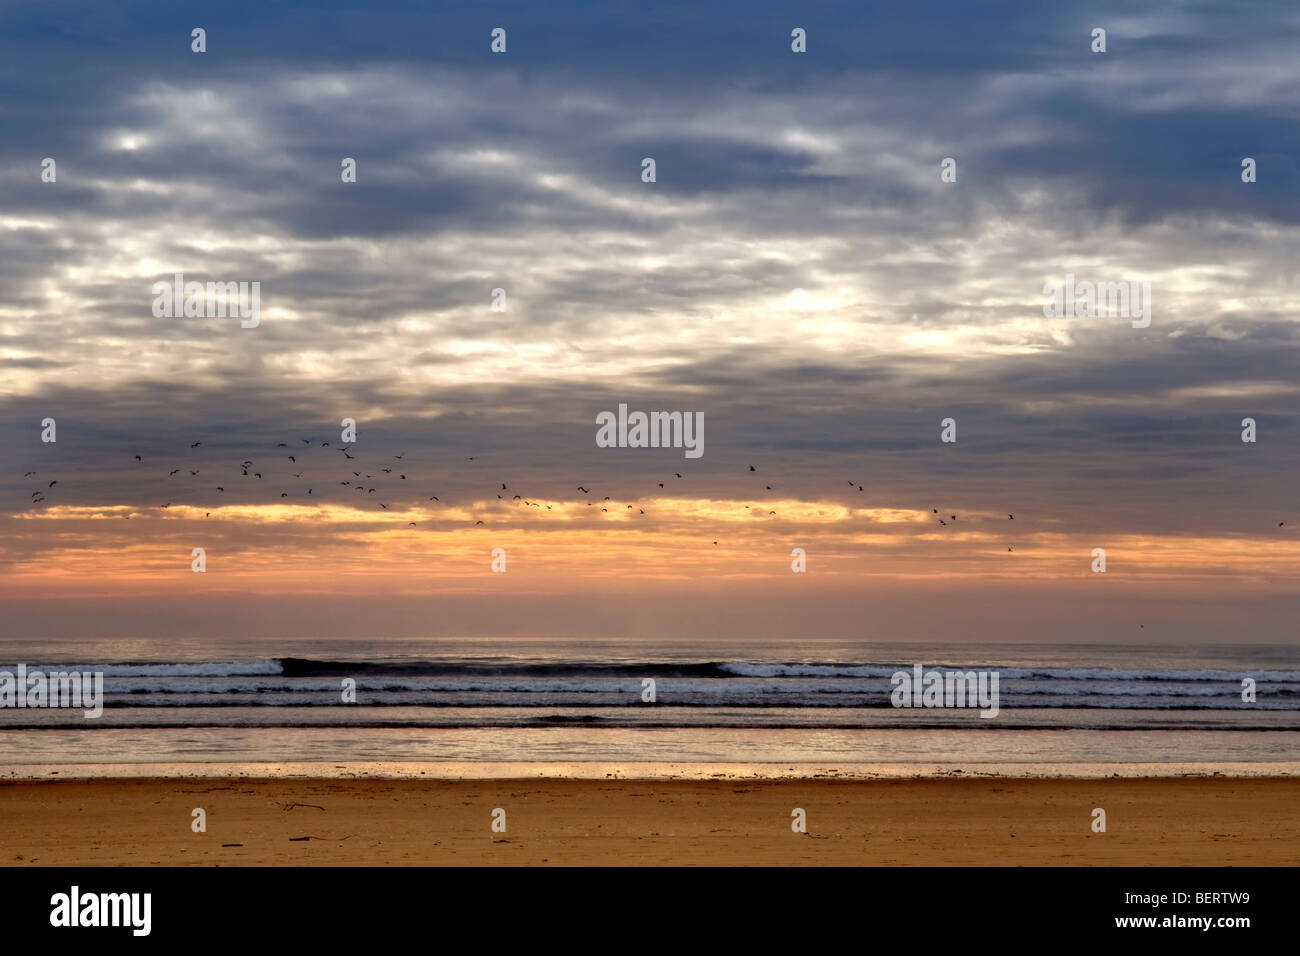 Sunset image at Pembrey sands, mid Wales with flock of flying birds silhouetted against the sky Stock Photo